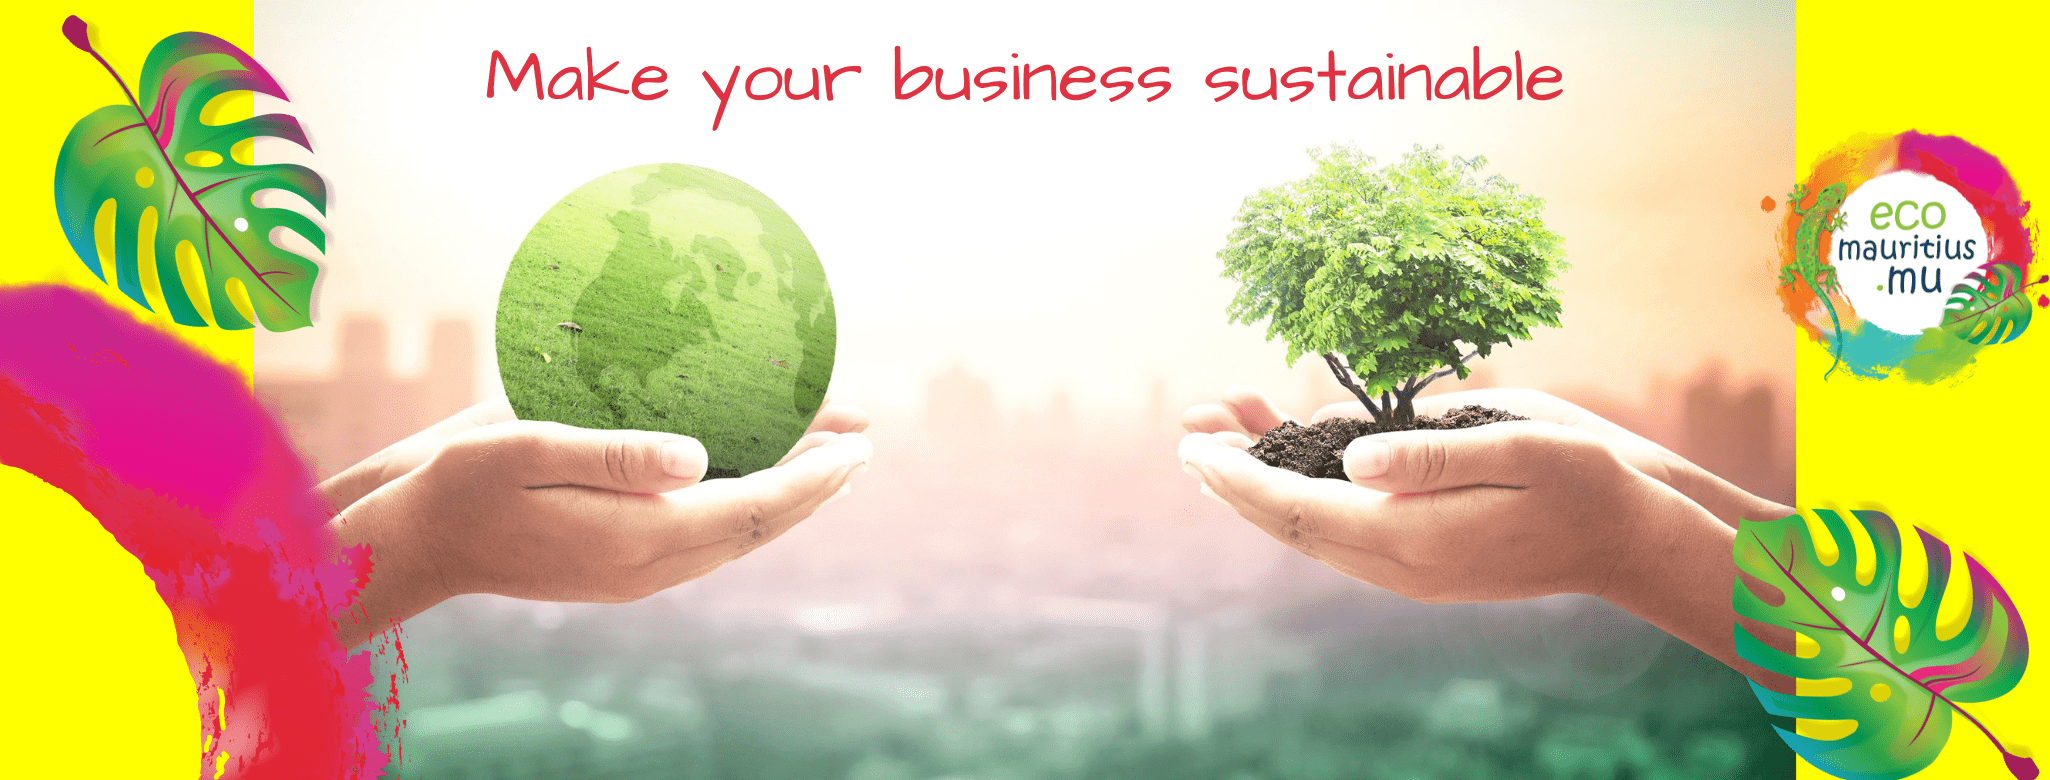 Ways to make your business more sustainable